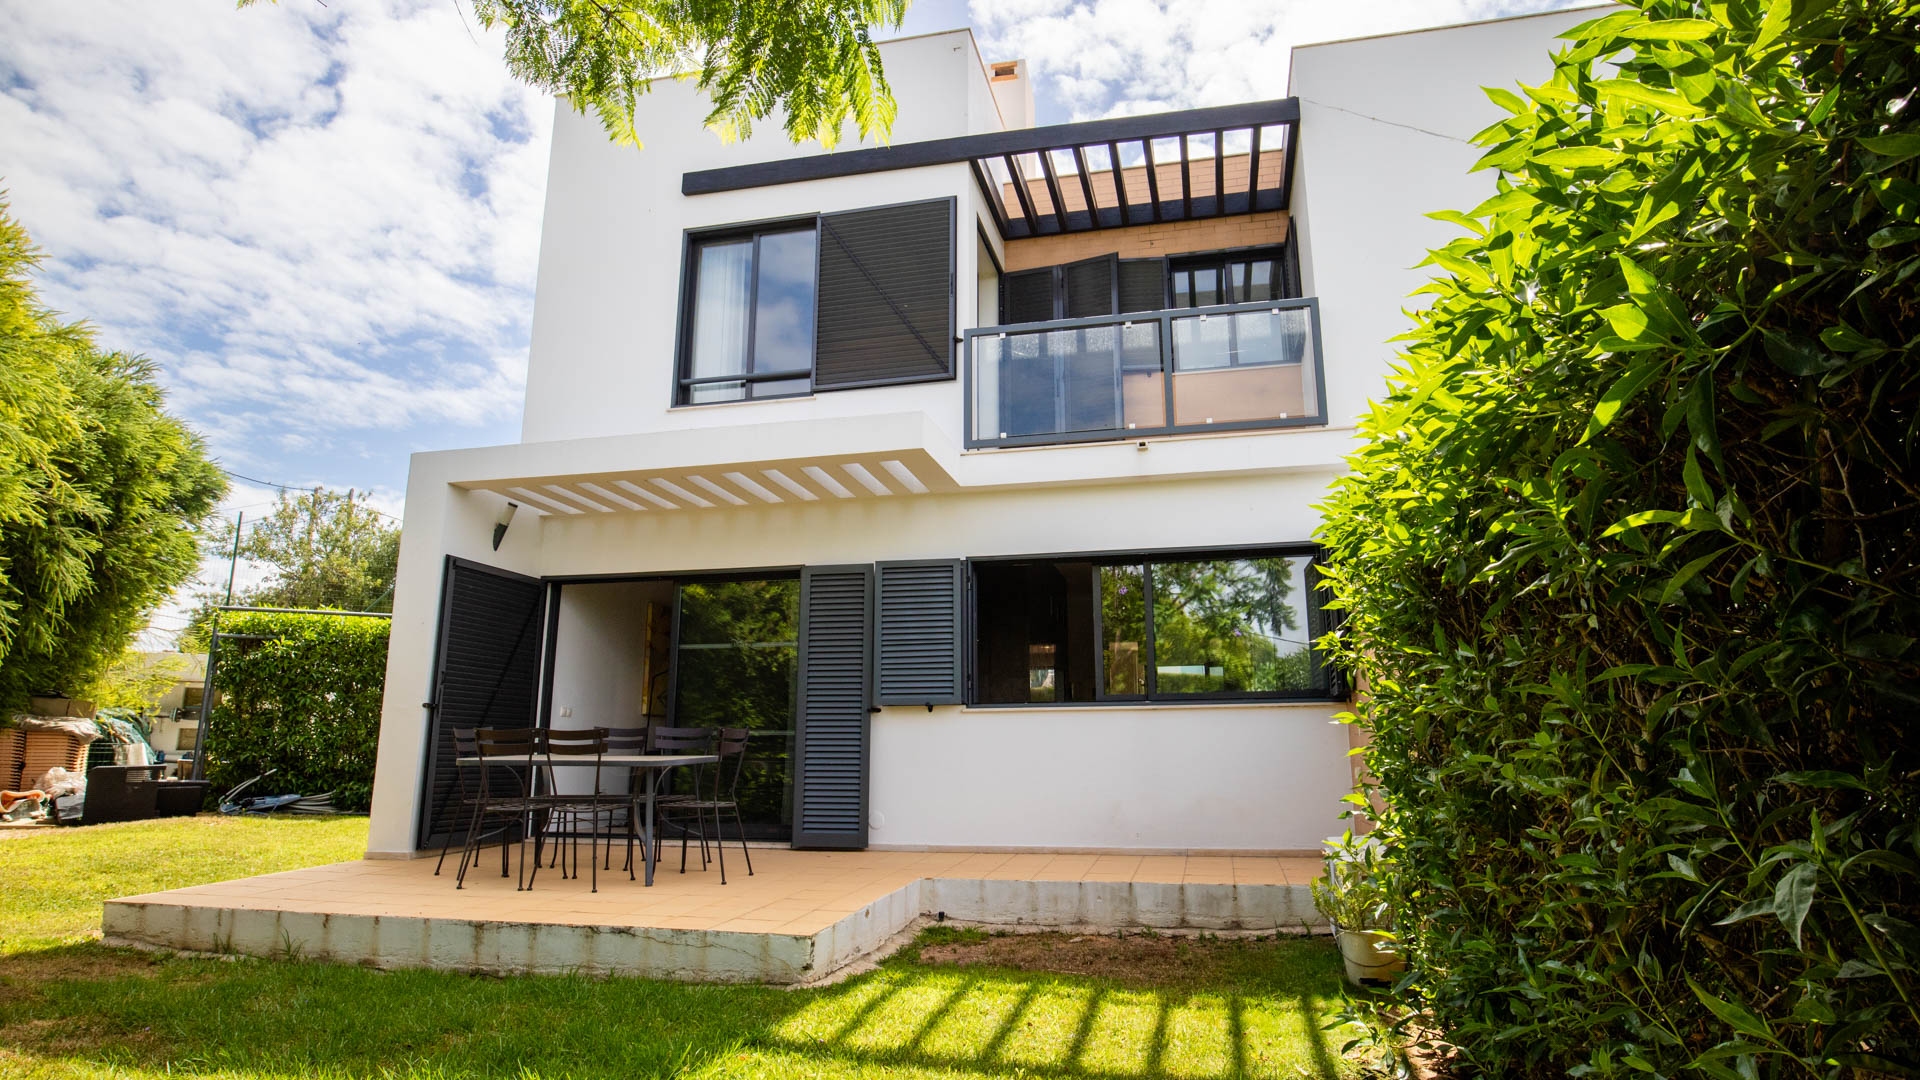 Modern 3 Bedroom Linked Villas with Sea Views, near Albufeira | VM1962 Townhouses with large communal pool and sea views close to beaches and amenities. Perfect for rental investment